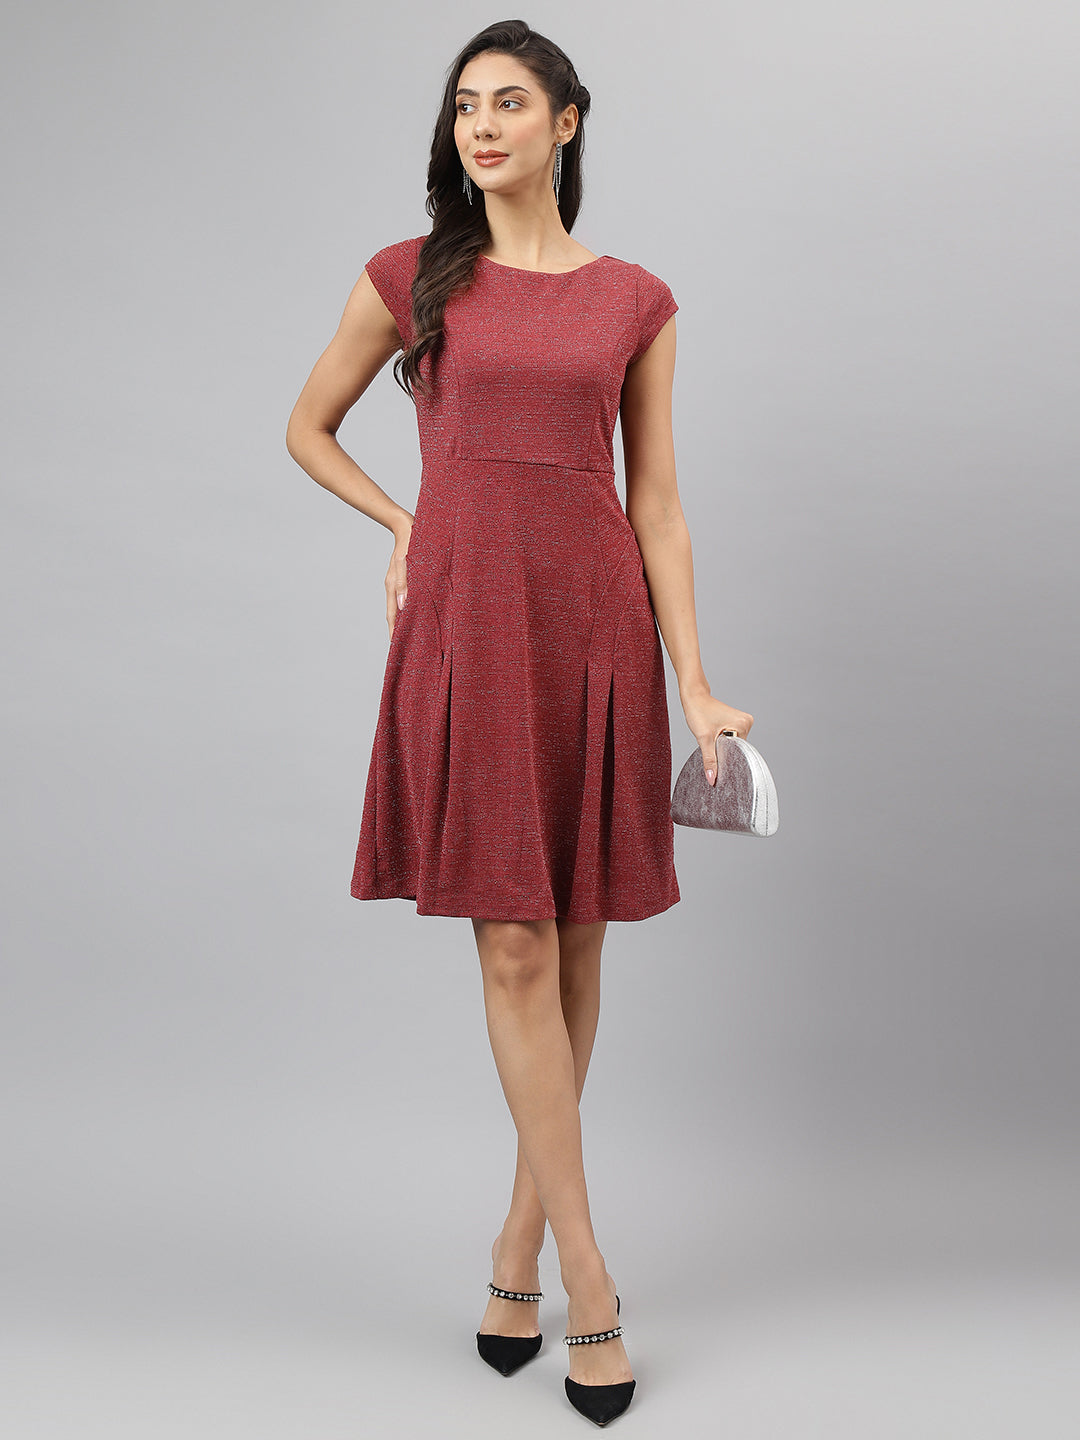 Pink Round Neck A-Line Casual Dress